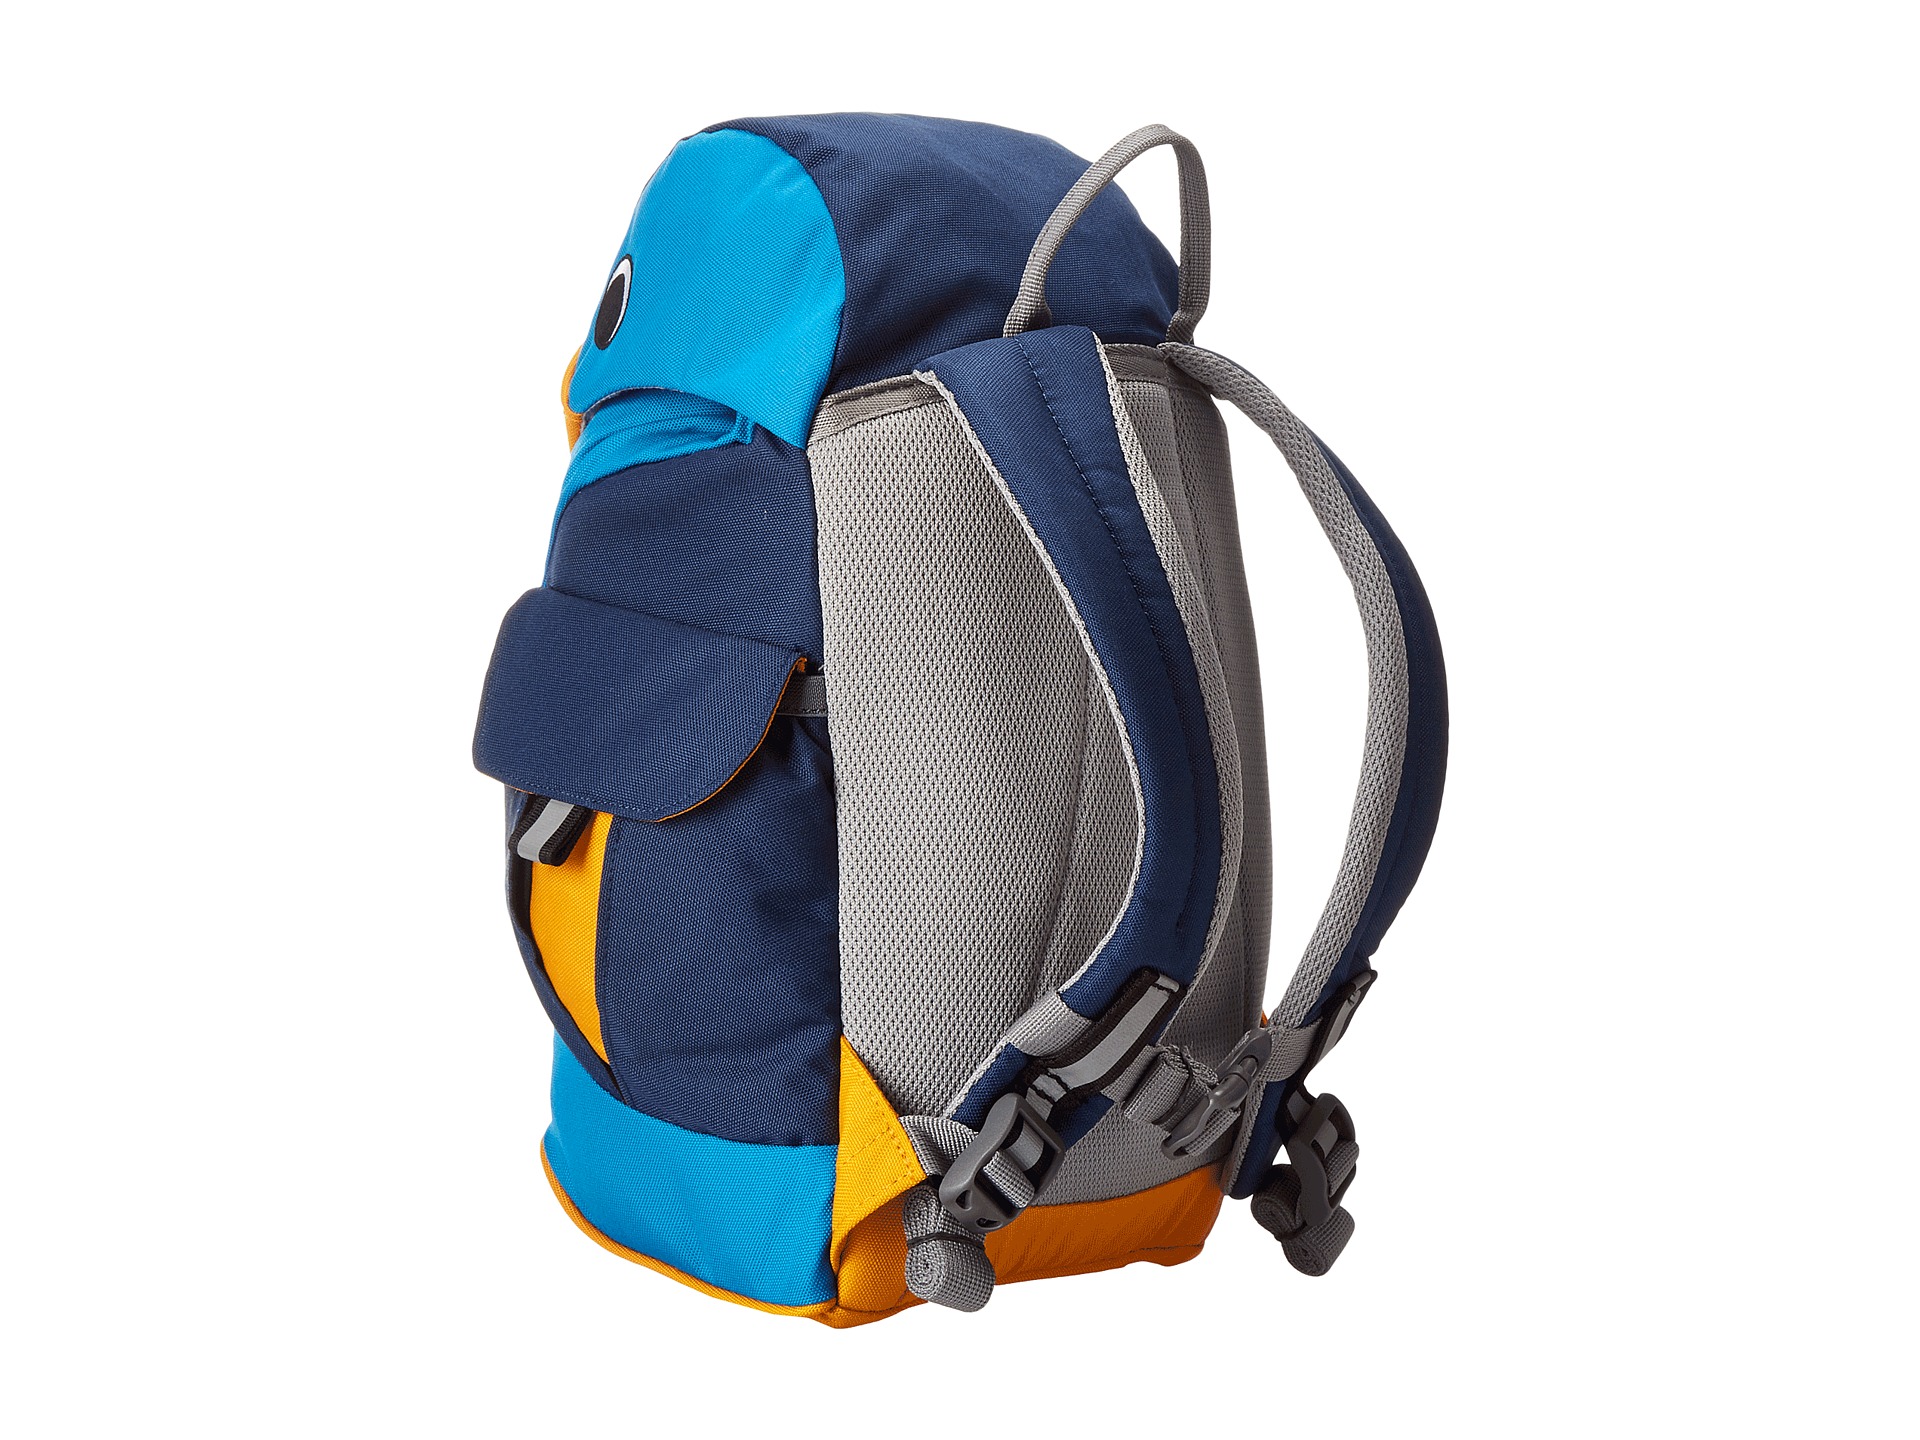 A blue children's backpack viewed from the back